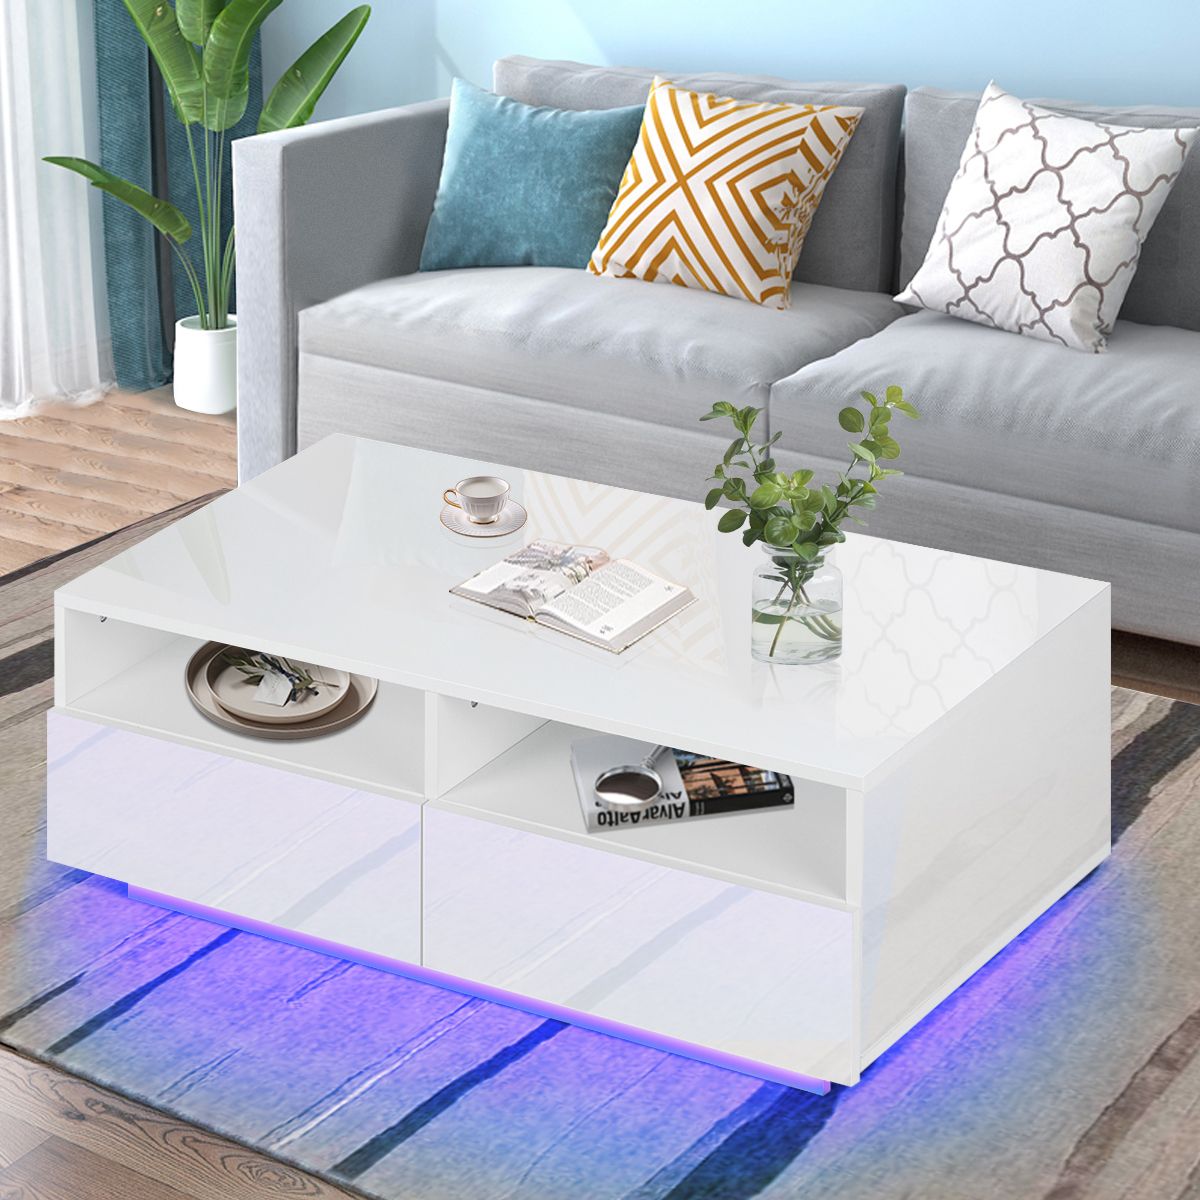 Favorite Rectangular Led Coffee Tables Regarding Hommpa High Gloss Led Coffee Table W/ 4 Drawers Living Room With Remote (View 12 of 15)